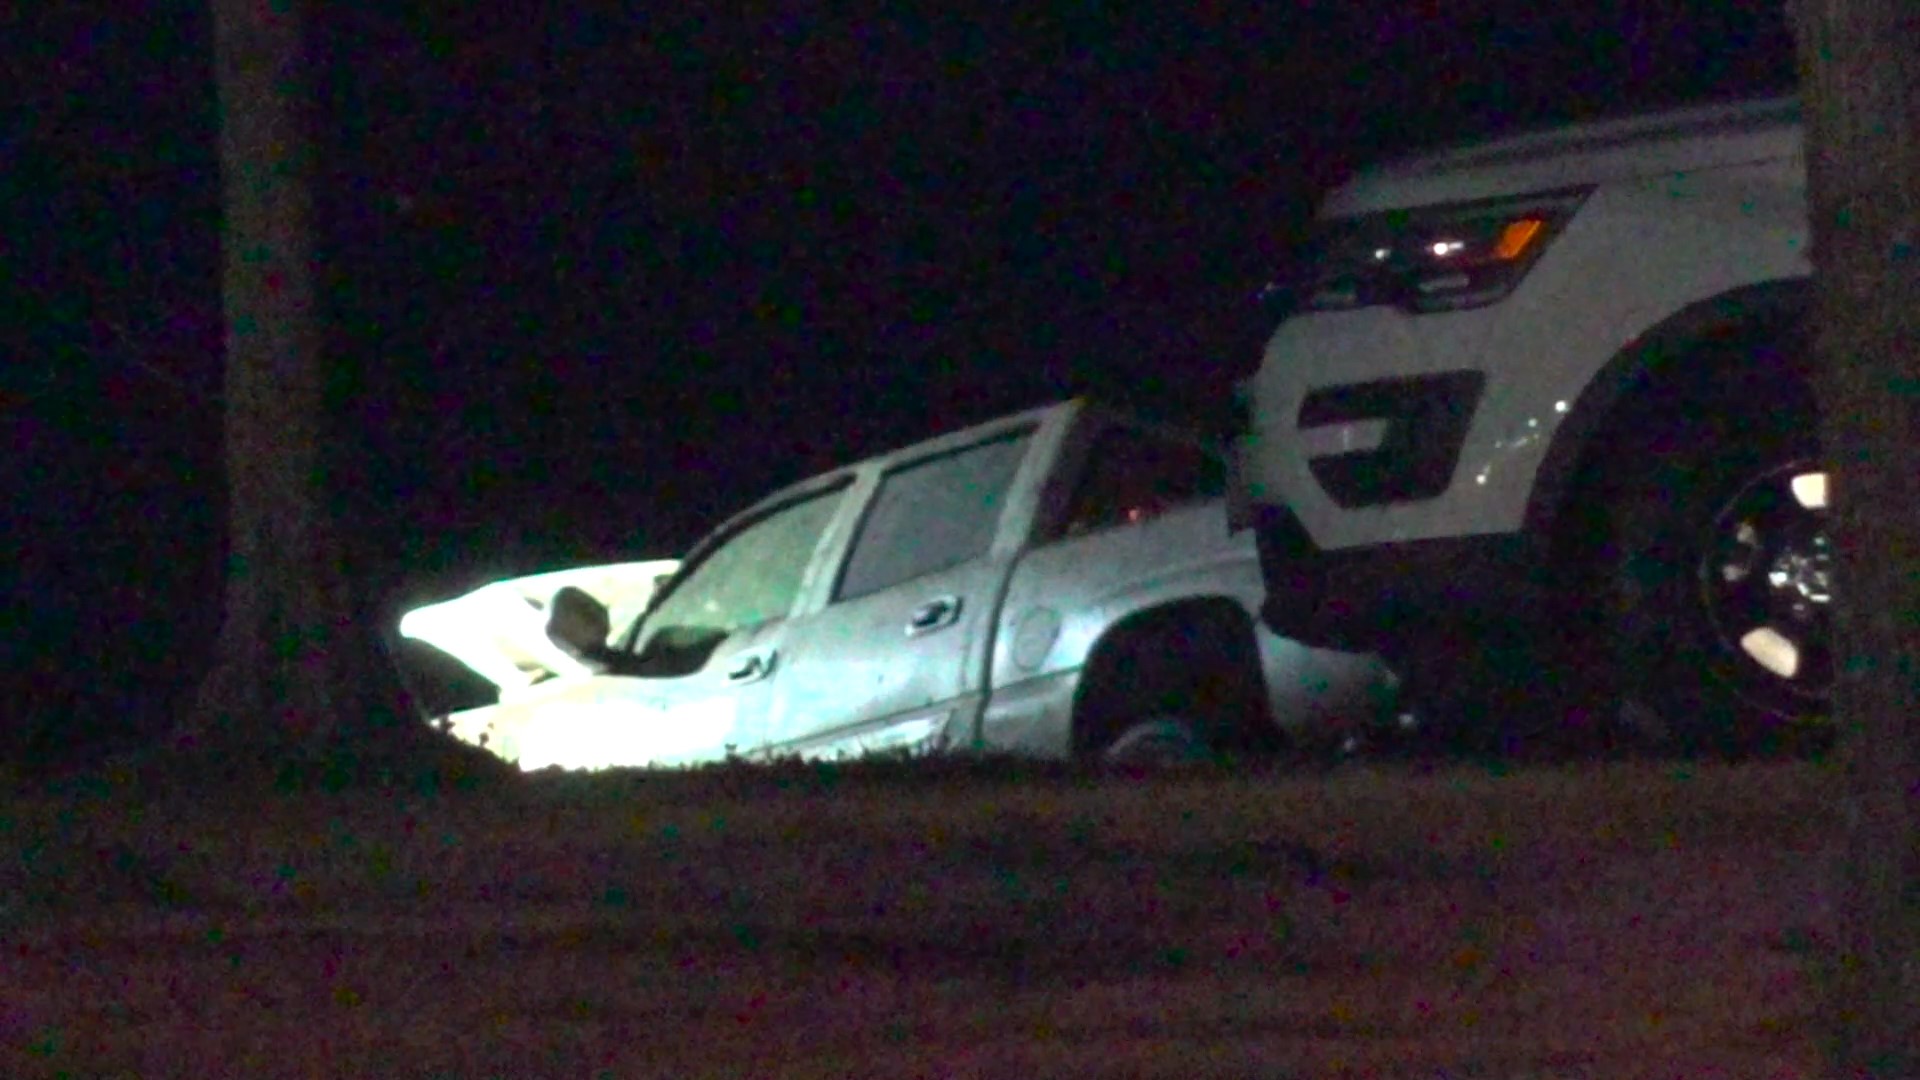 The wreck happened before 8 p.m. in the 8800 block of N. Main north of Baytown where deputies found a pickup truck in a ditch.